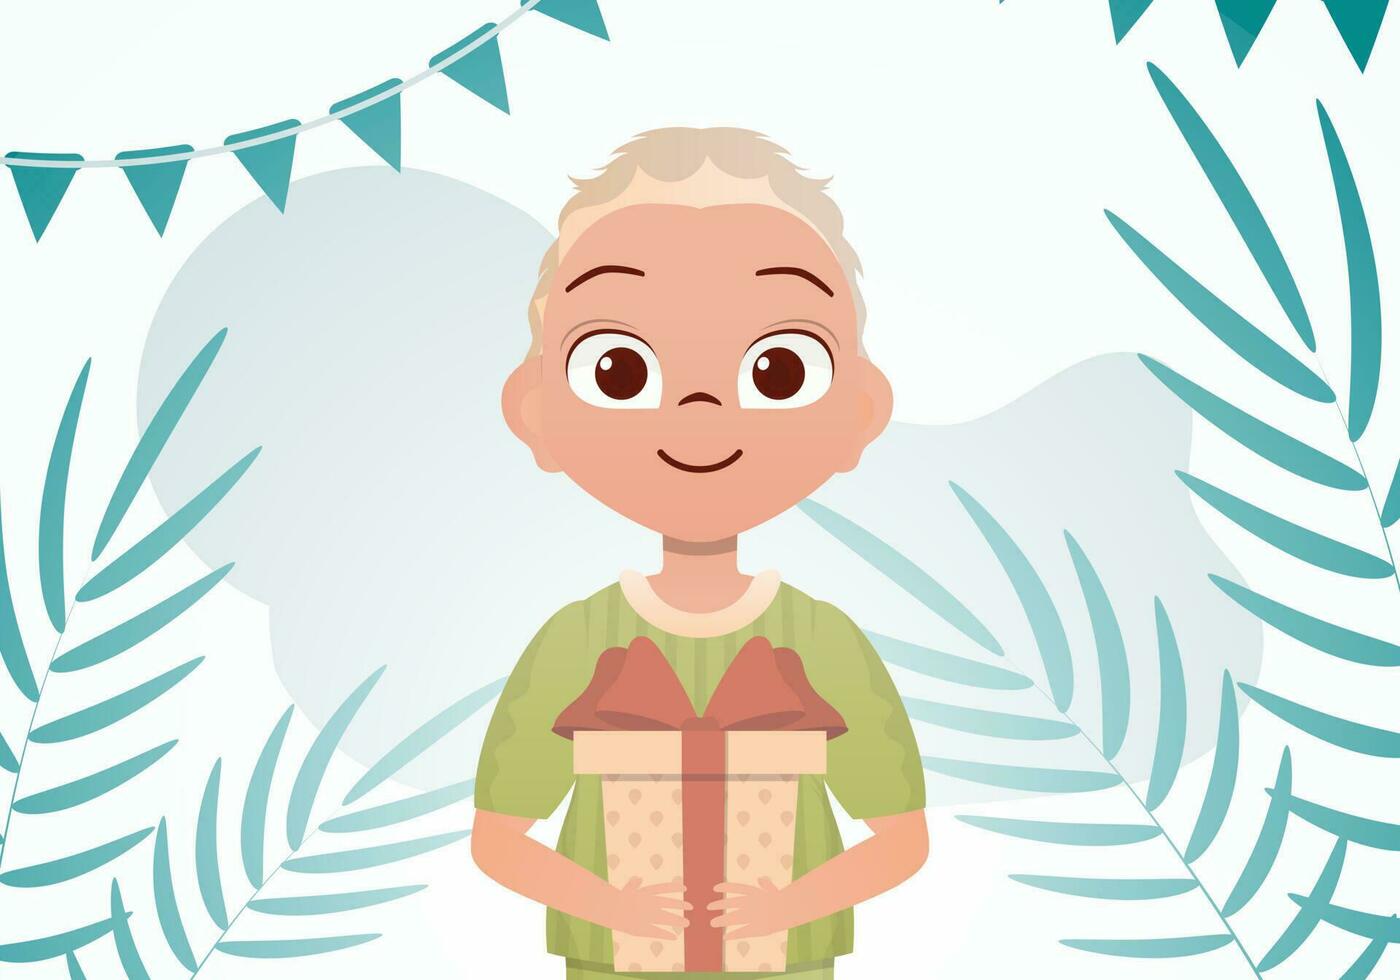 Smiling preschool boy holding a gift box in his hands. Birthday. Cartoon style. vector